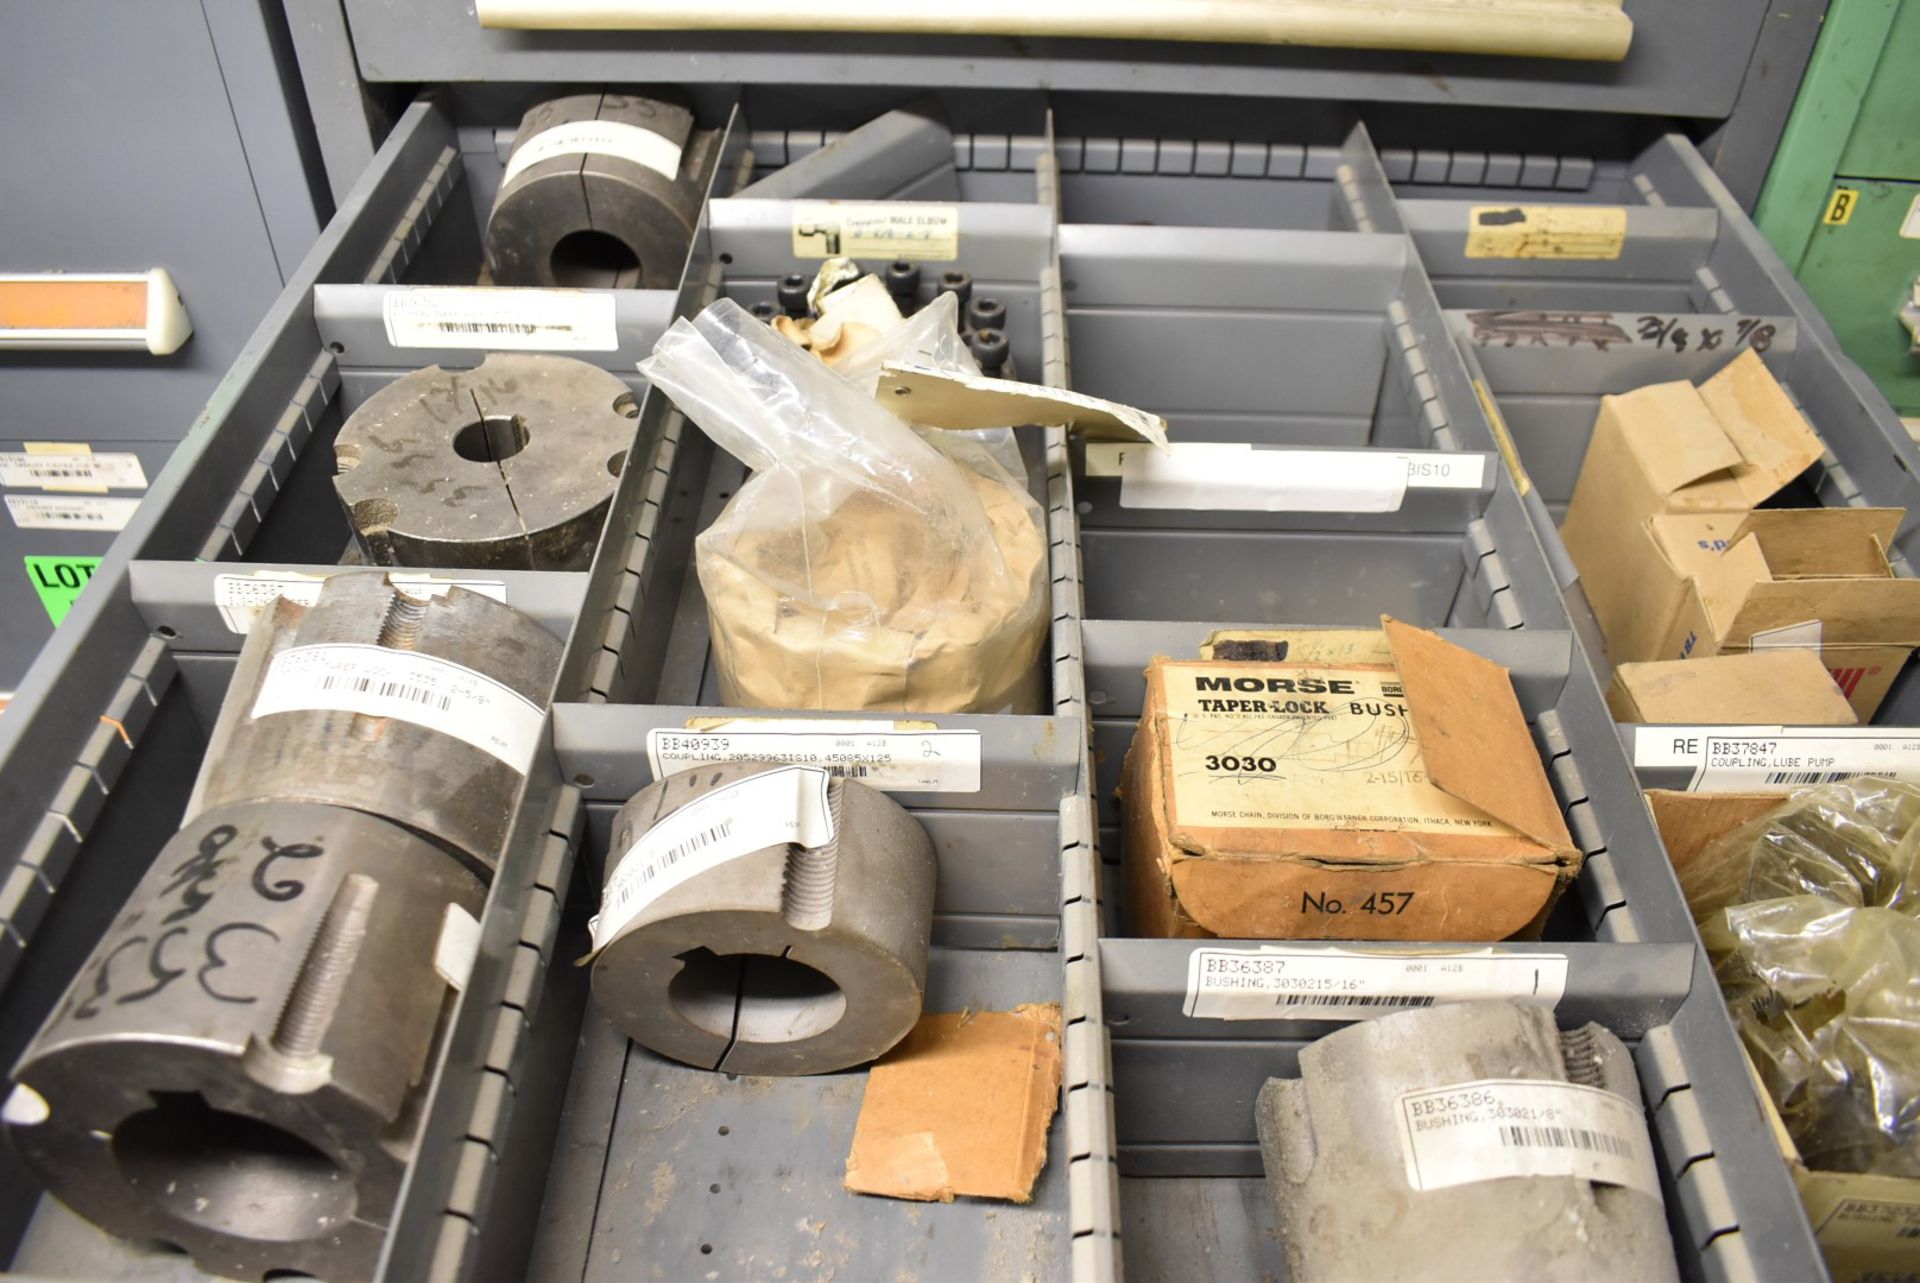 LOT/ CONTENTS OF CABINET - INCLUDING O-RINGS, BUSHINGS, SPROCKETS, BELTS, SPARE PARTS (TOOL - Image 2 of 5